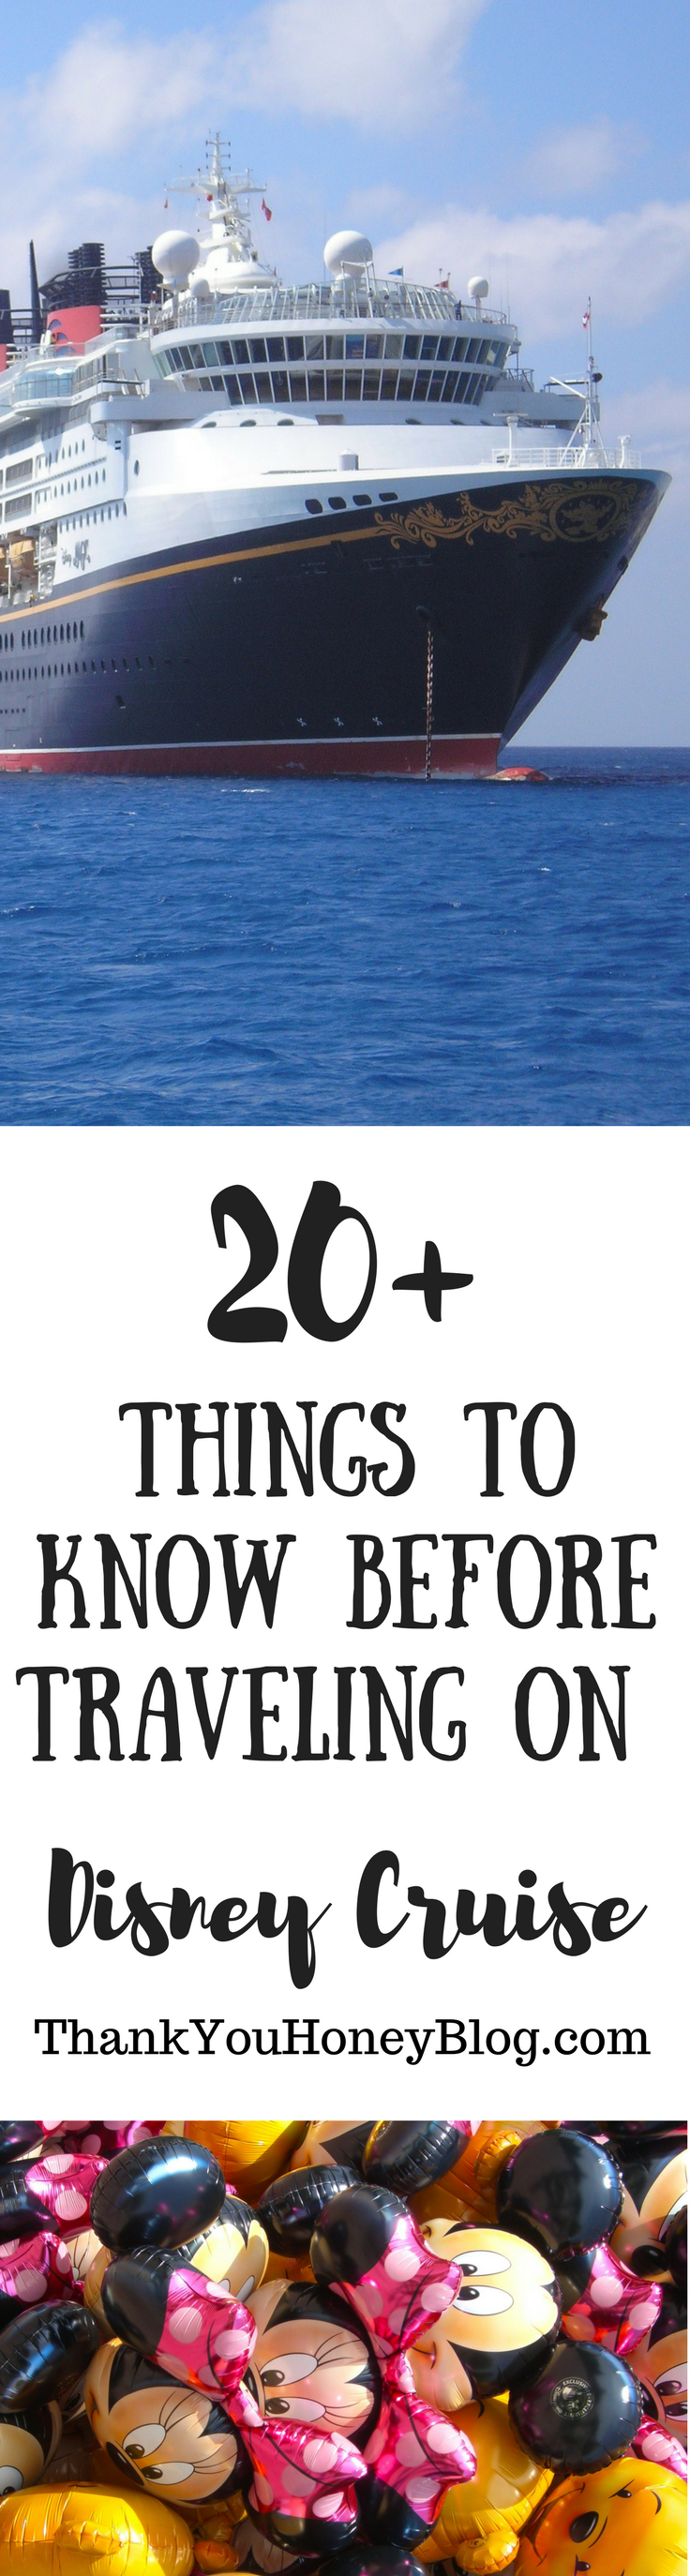 20+ Things to Know Before Traveling on Disney Cruise, The Ultimate Disney Cruise Must Knows, Packing List, Must Knows, The Ultimate Disney Cruise Must Knows, What to Pack on a Disney Cruise, Disney Cruise, Disney, Cruise, Travel, Family Travel, ThankYouHoneyBlog.com